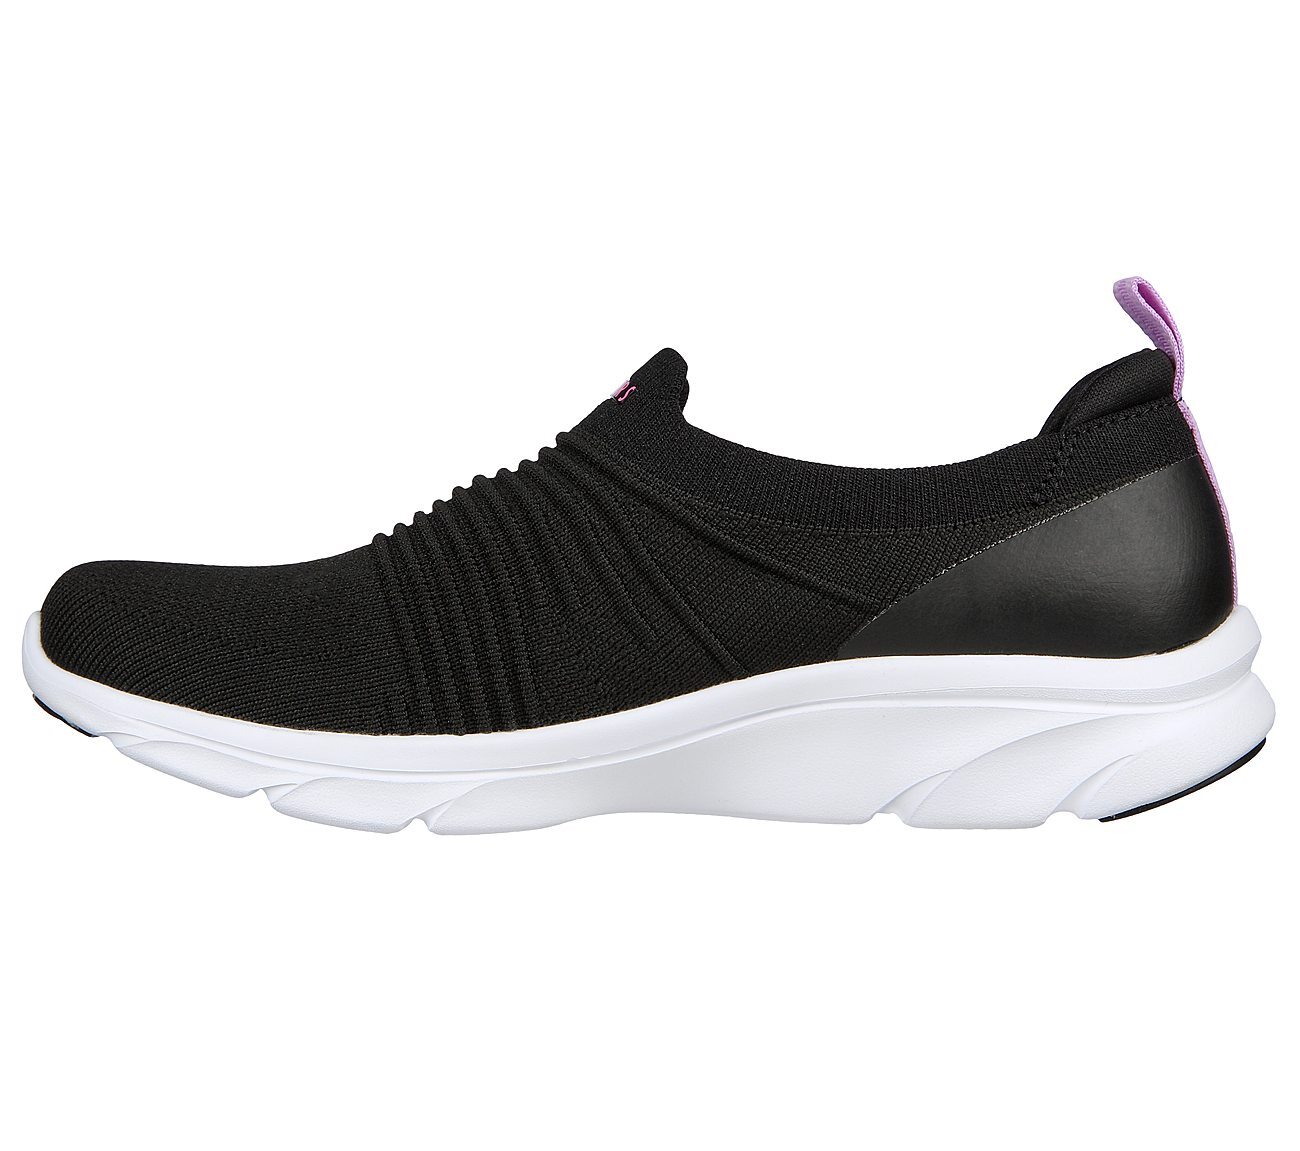 D'LUX COMFORT-GLOW TIME, BLACK/WHITE Footwear Left View